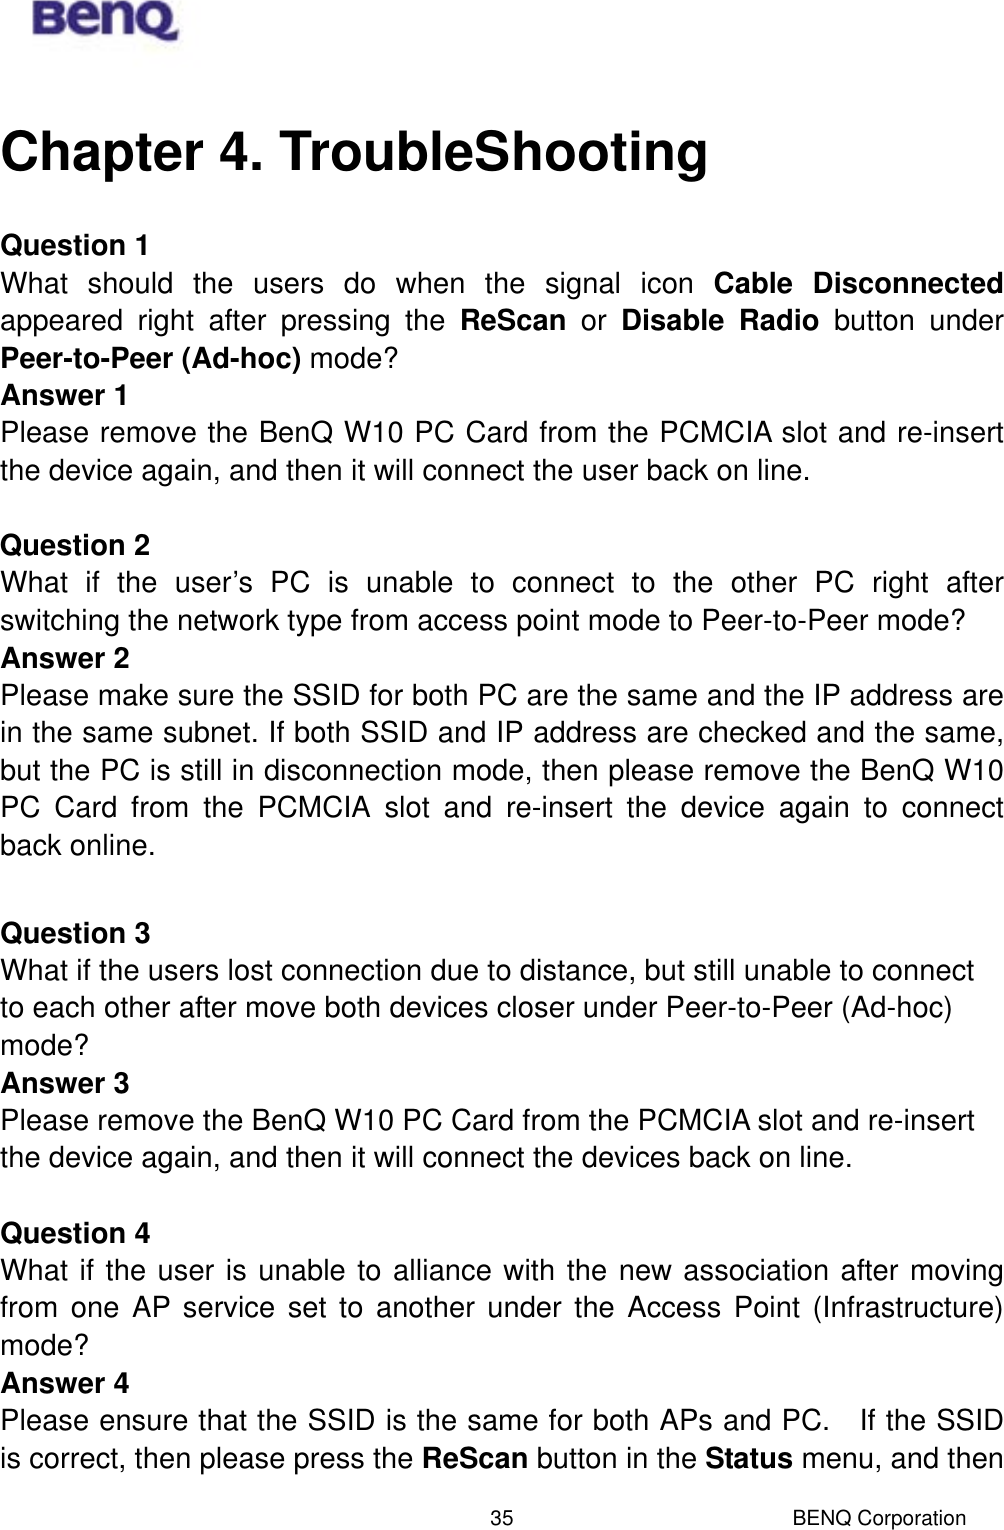  BENQ Corporation 35Chapter 4. TroubleShooting Question 1 What should the users do when the signal icon Cable Disconnected appeared right after pressing the ReScan or Disable Radio button under Peer-to-Peer (Ad-hoc) mode? Answer 1 Please remove the BenQ W10 PC Card from the PCMCIA slot and re-insert the device again, and then it will connect the user back on line.  Question 2 What if the user’s PC is unable to connect to the other PC right after switching the network type from access point mode to Peer-to-Peer mode? Answer 2 Please make sure the SSID for both PC are the same and the IP address are in the same subnet. If both SSID and IP address are checked and the same, but the PC is still in disconnection mode, then please remove the BenQ W10 PC Card from the PCMCIA slot and re-insert the device again to connect back online.  Question 3 What if the users lost connection due to distance, but still unable to connect to each other after move both devices closer under Peer-to-Peer (Ad-hoc) mode? Answer 3 Please remove the BenQ W10 PC Card from the PCMCIA slot and re-insert the device again, and then it will connect the devices back on line.  Question 4 What if the user is unable to alliance with the new association after moving from one AP service set to another under the Access Point (Infrastructure) mode? Answer 4 Please ensure that the SSID is the same for both APs and PC.    If the SSID is correct, then please press the ReScan button in the Status menu, and then 